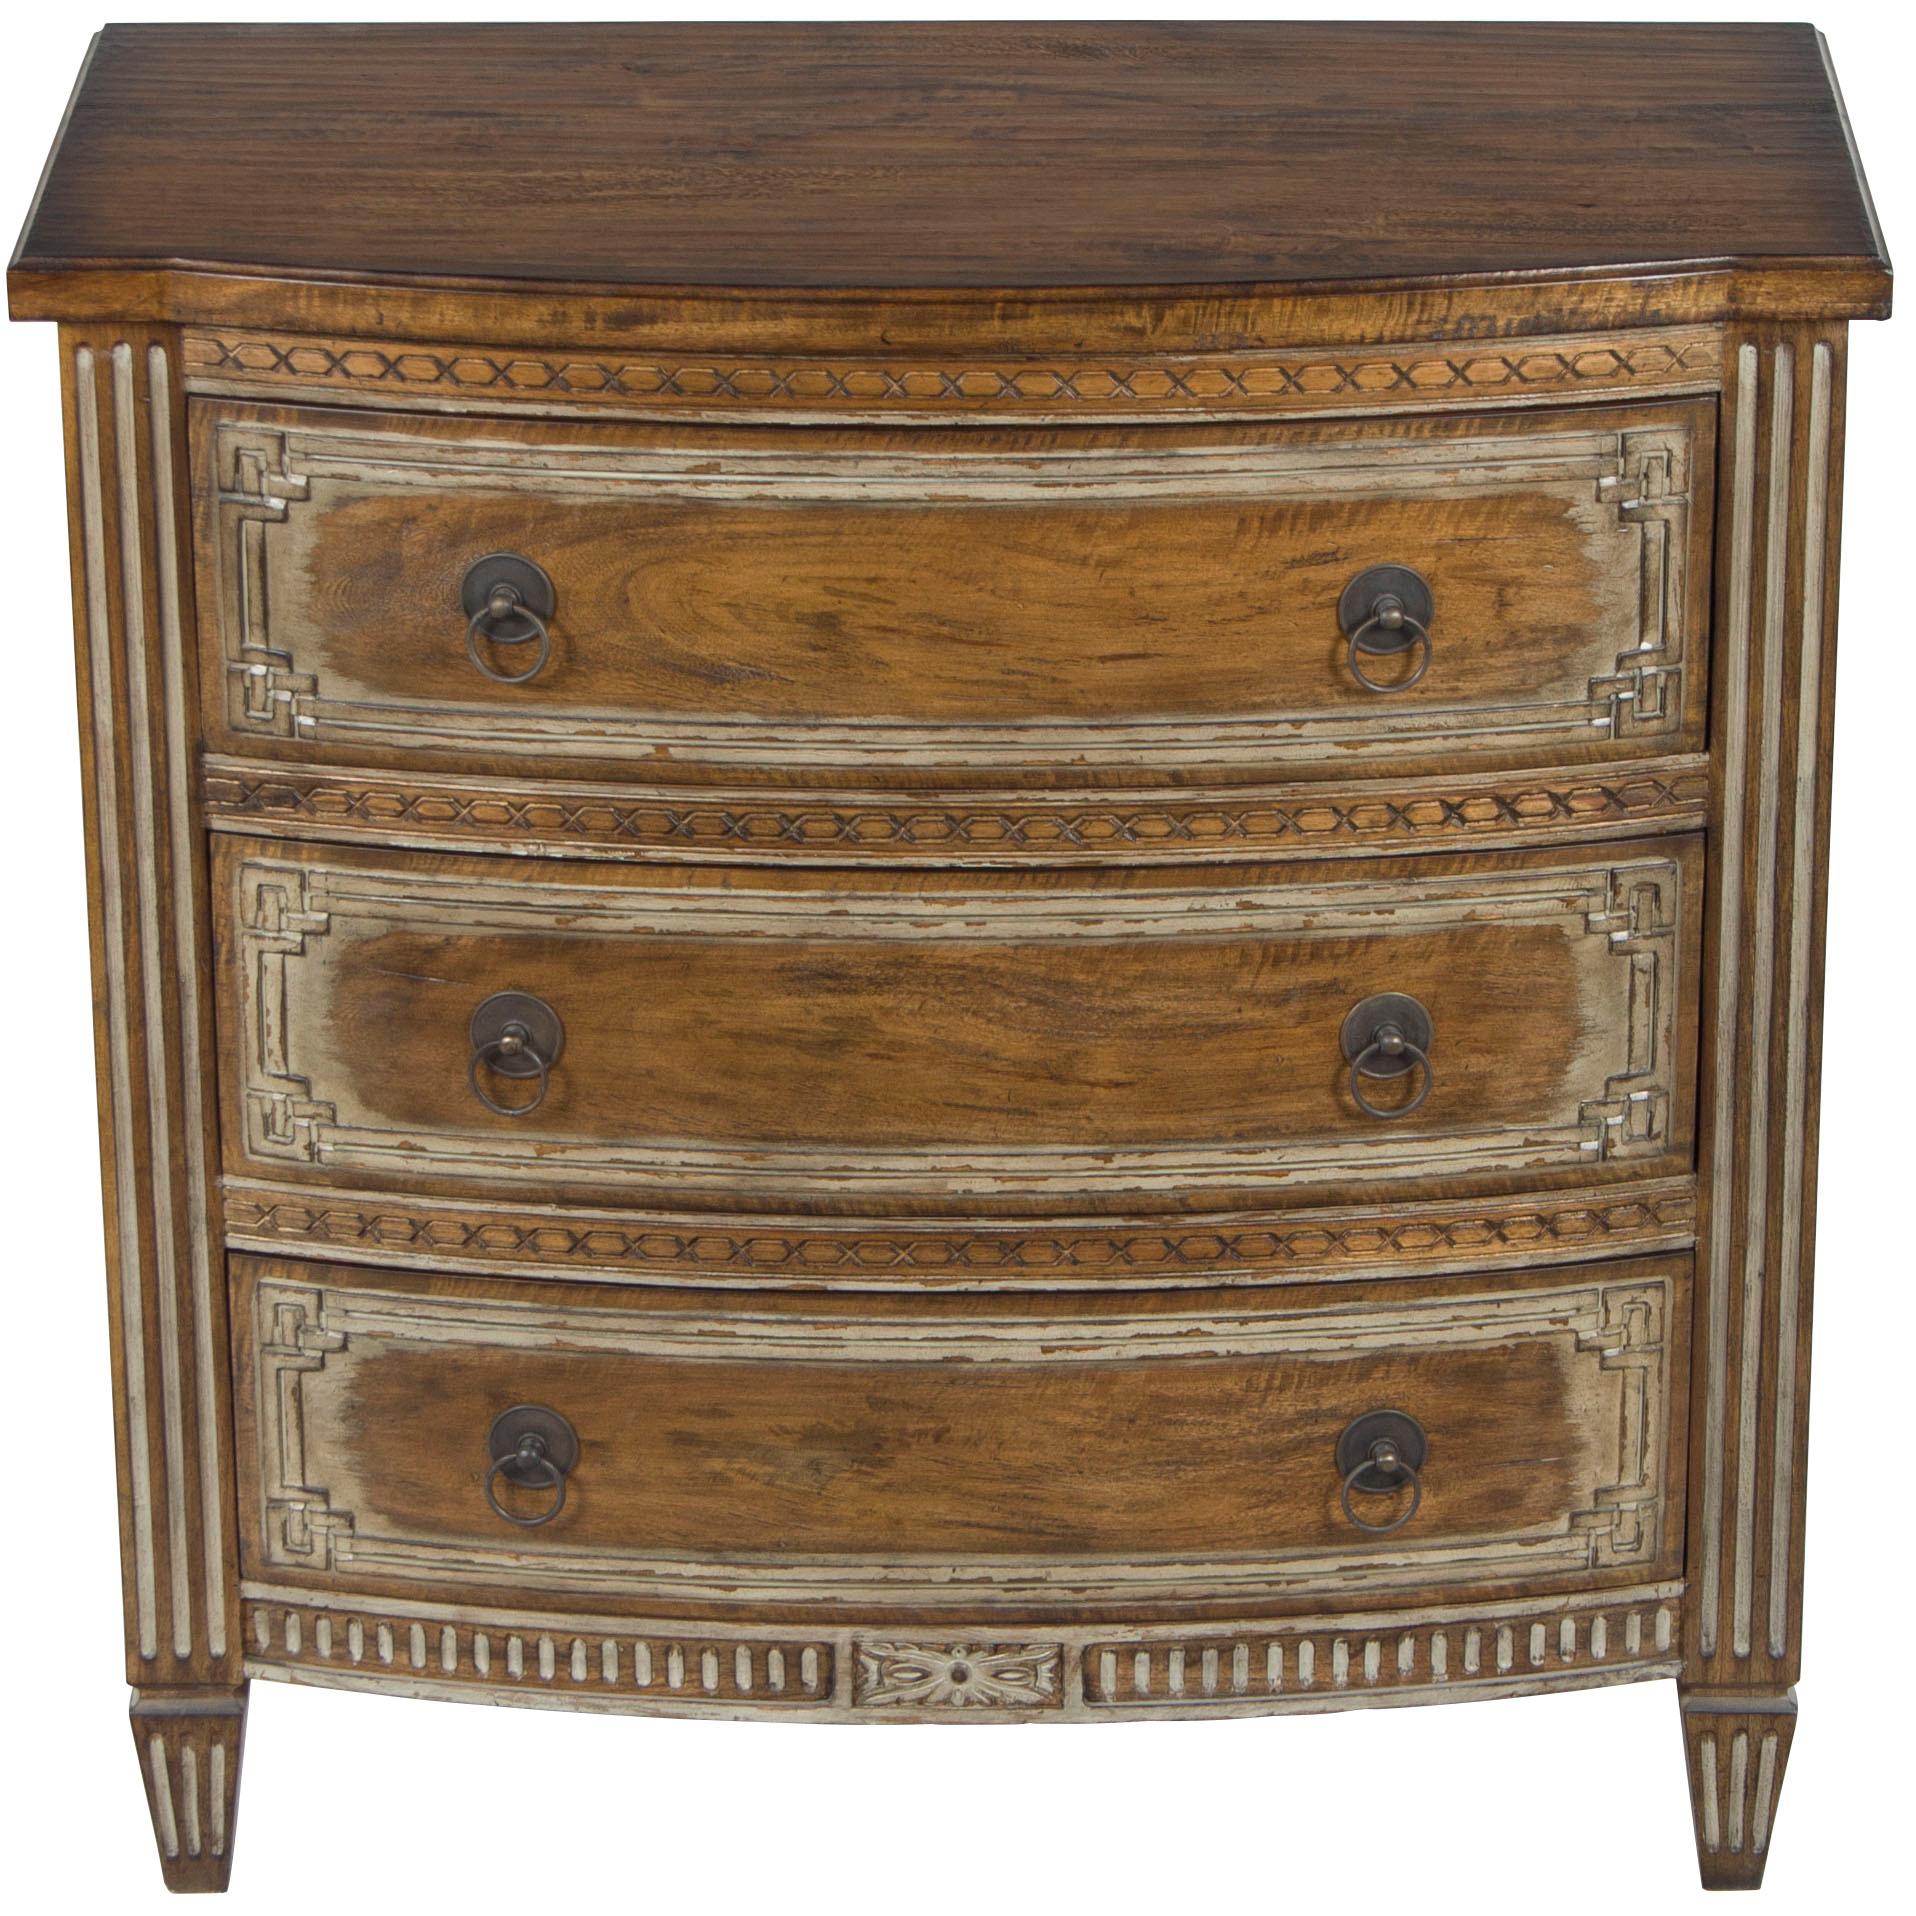 Distressed Rustic Three-Drawer Chest of Drawers Dresser For Sale